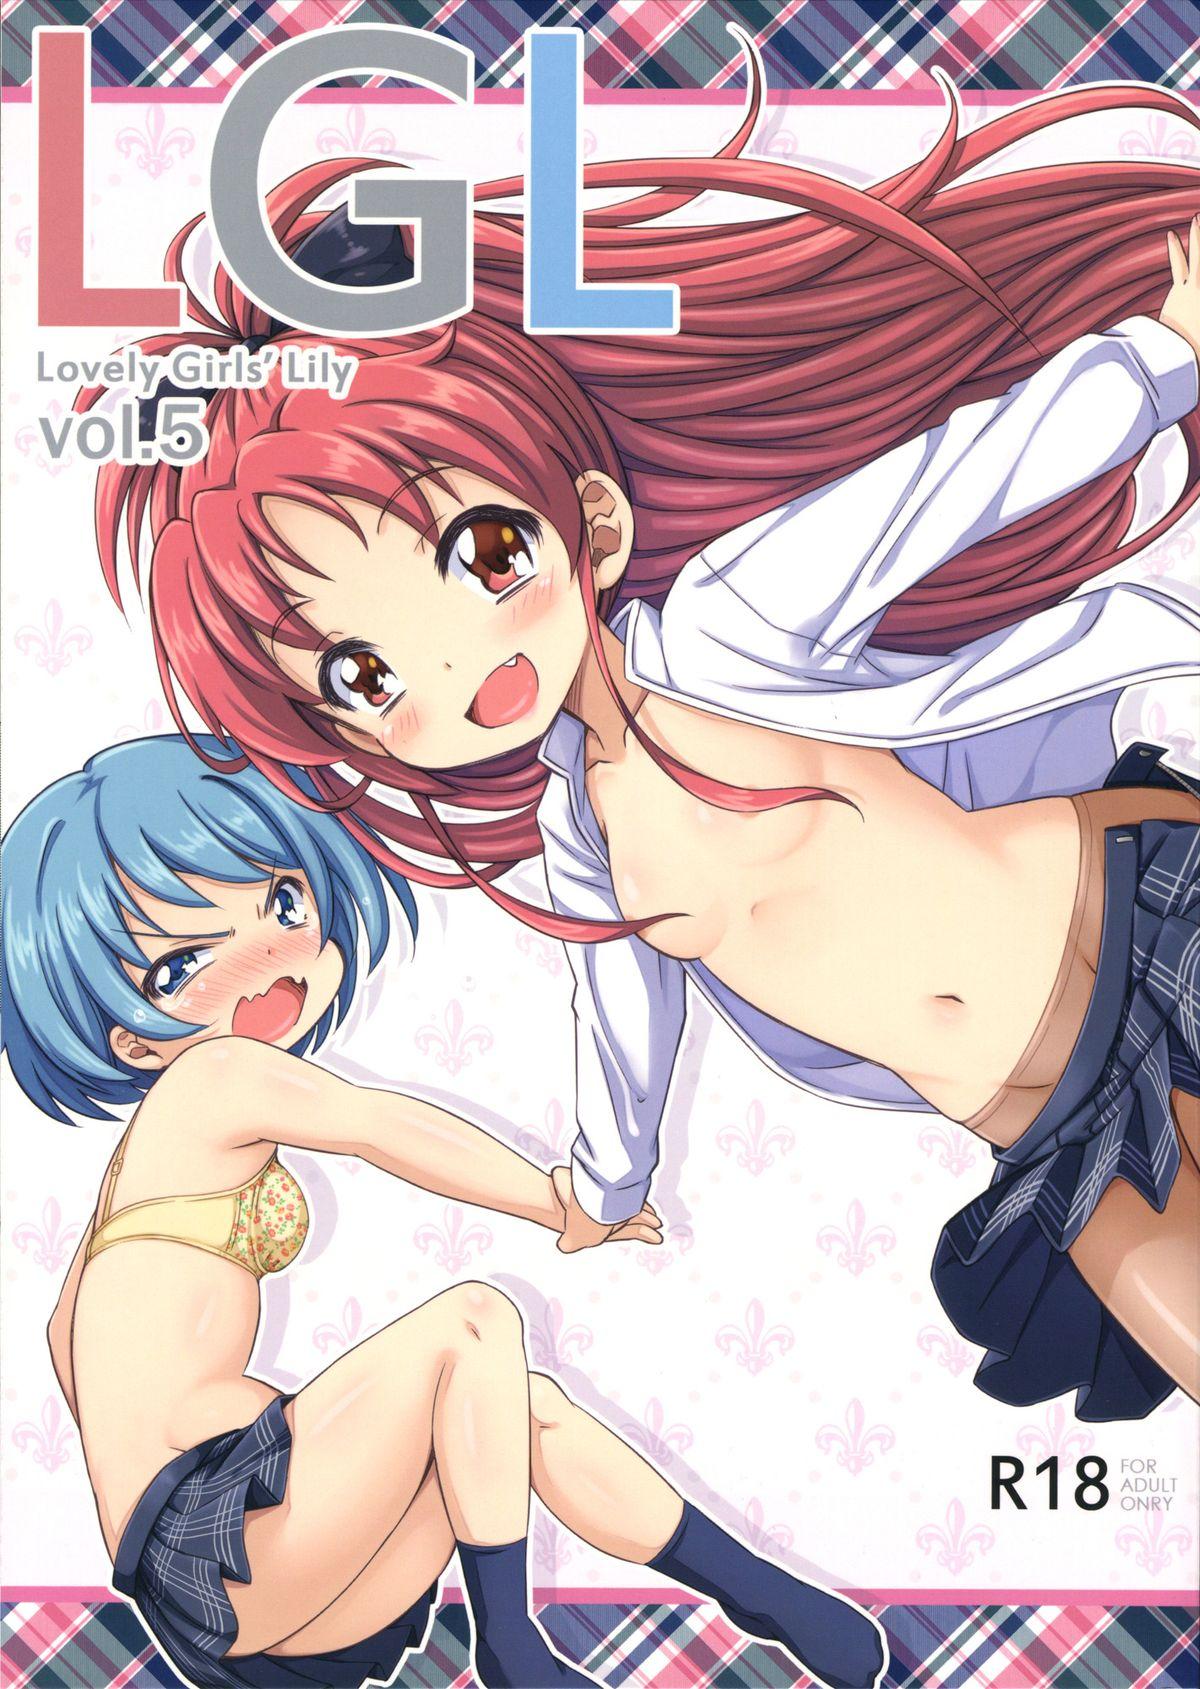 8teenxxx Lovely Girls' Lily Vol. 5 - Puella magi madoka magica Shaven - Page 1